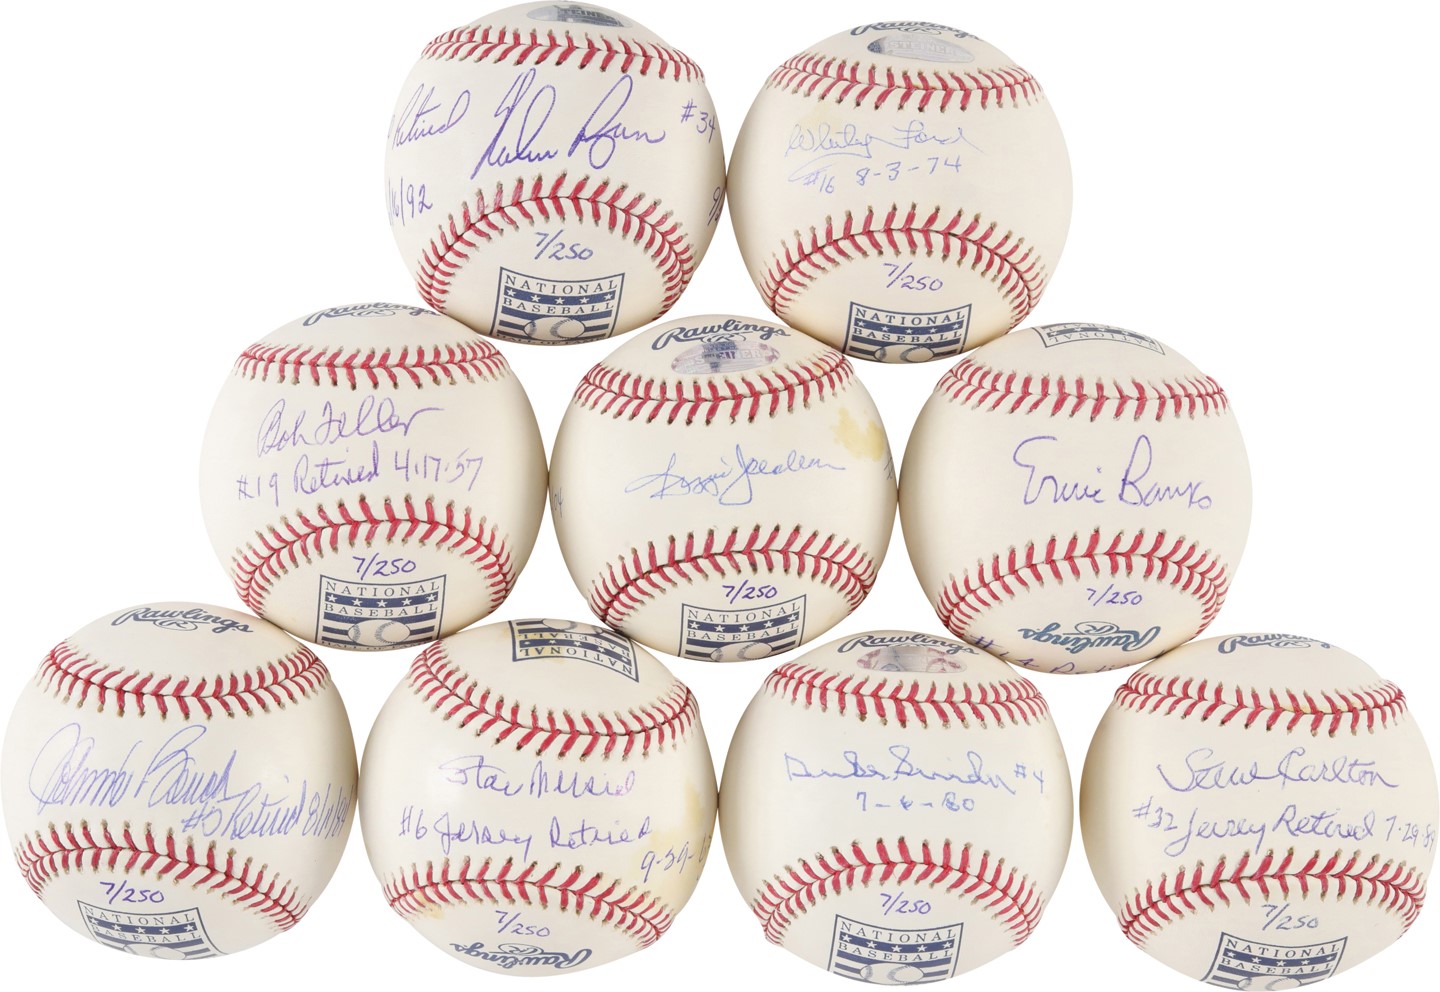 Beautiful Hall of Famer Signed Inscribed Retired Jersey Number Baseball Collection - Each LE 7/250 (15)